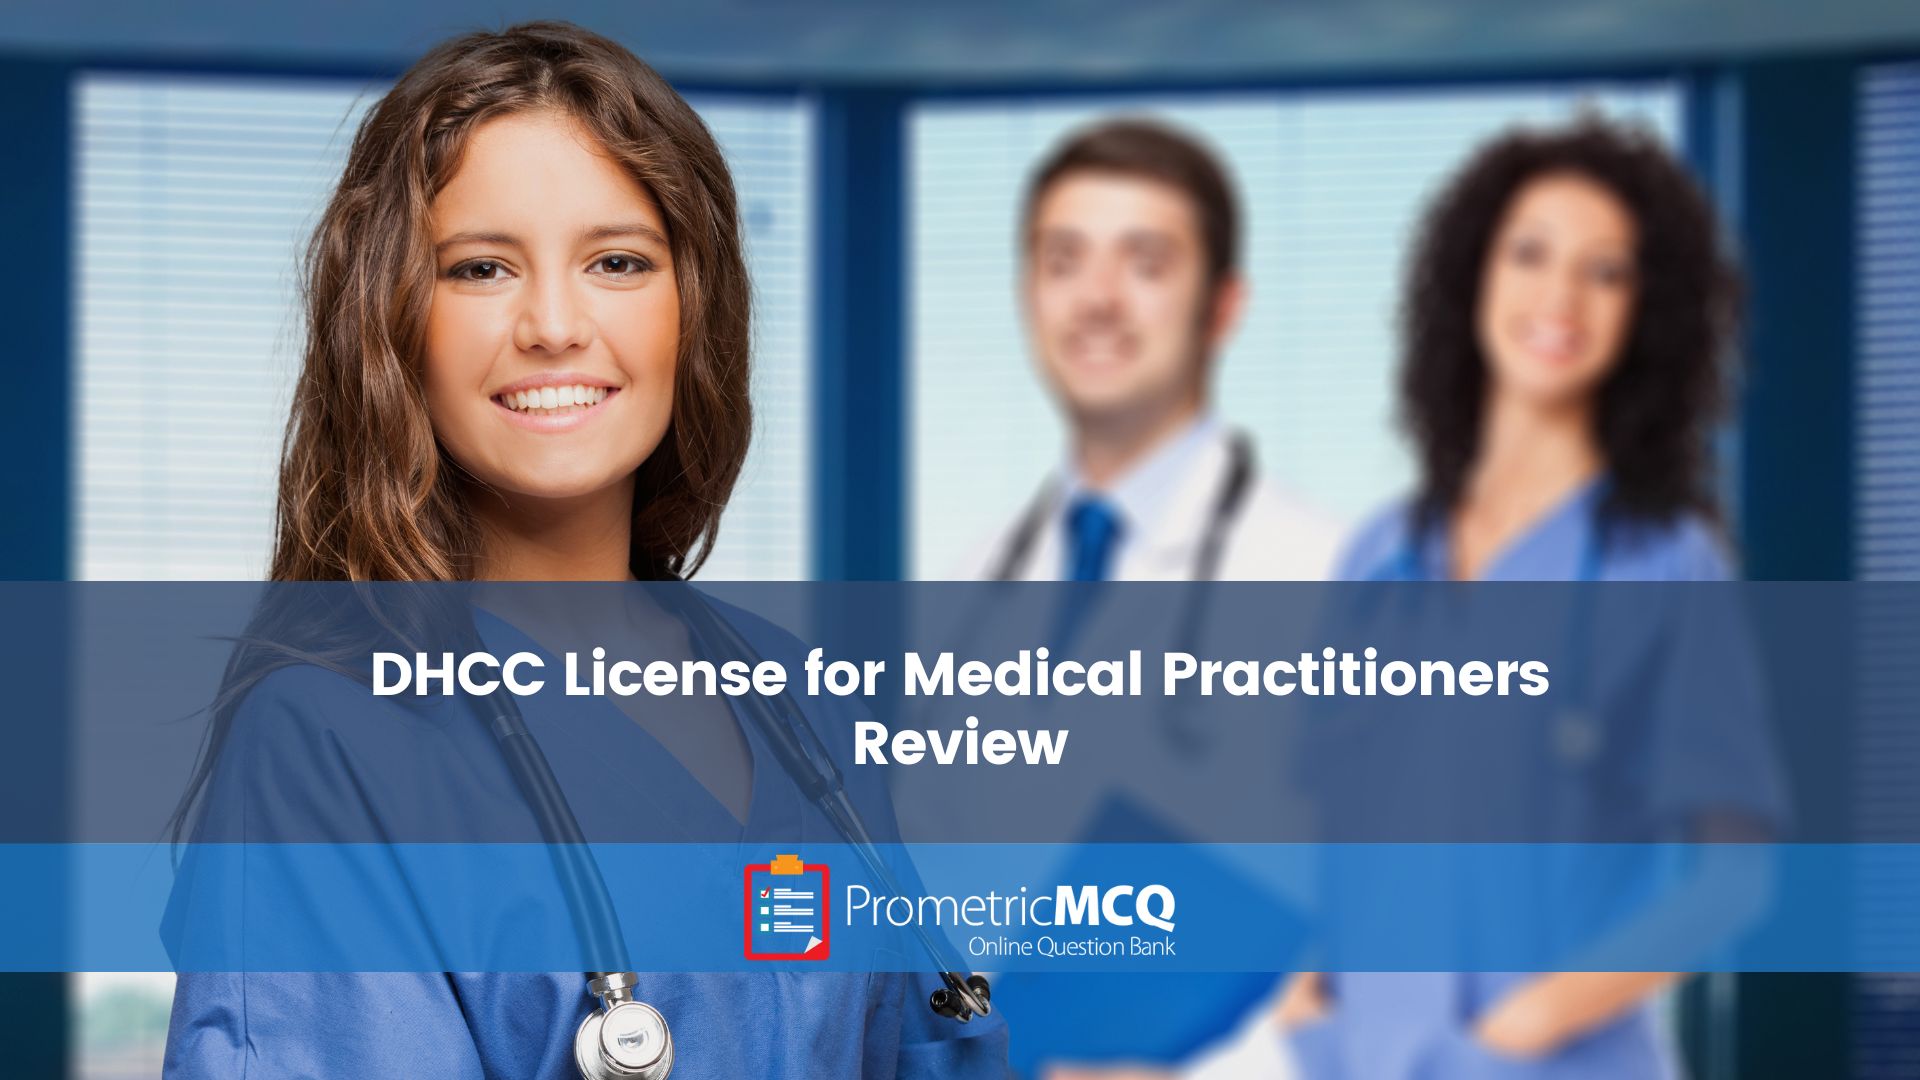 DHCC License for Medical Practitioners Review